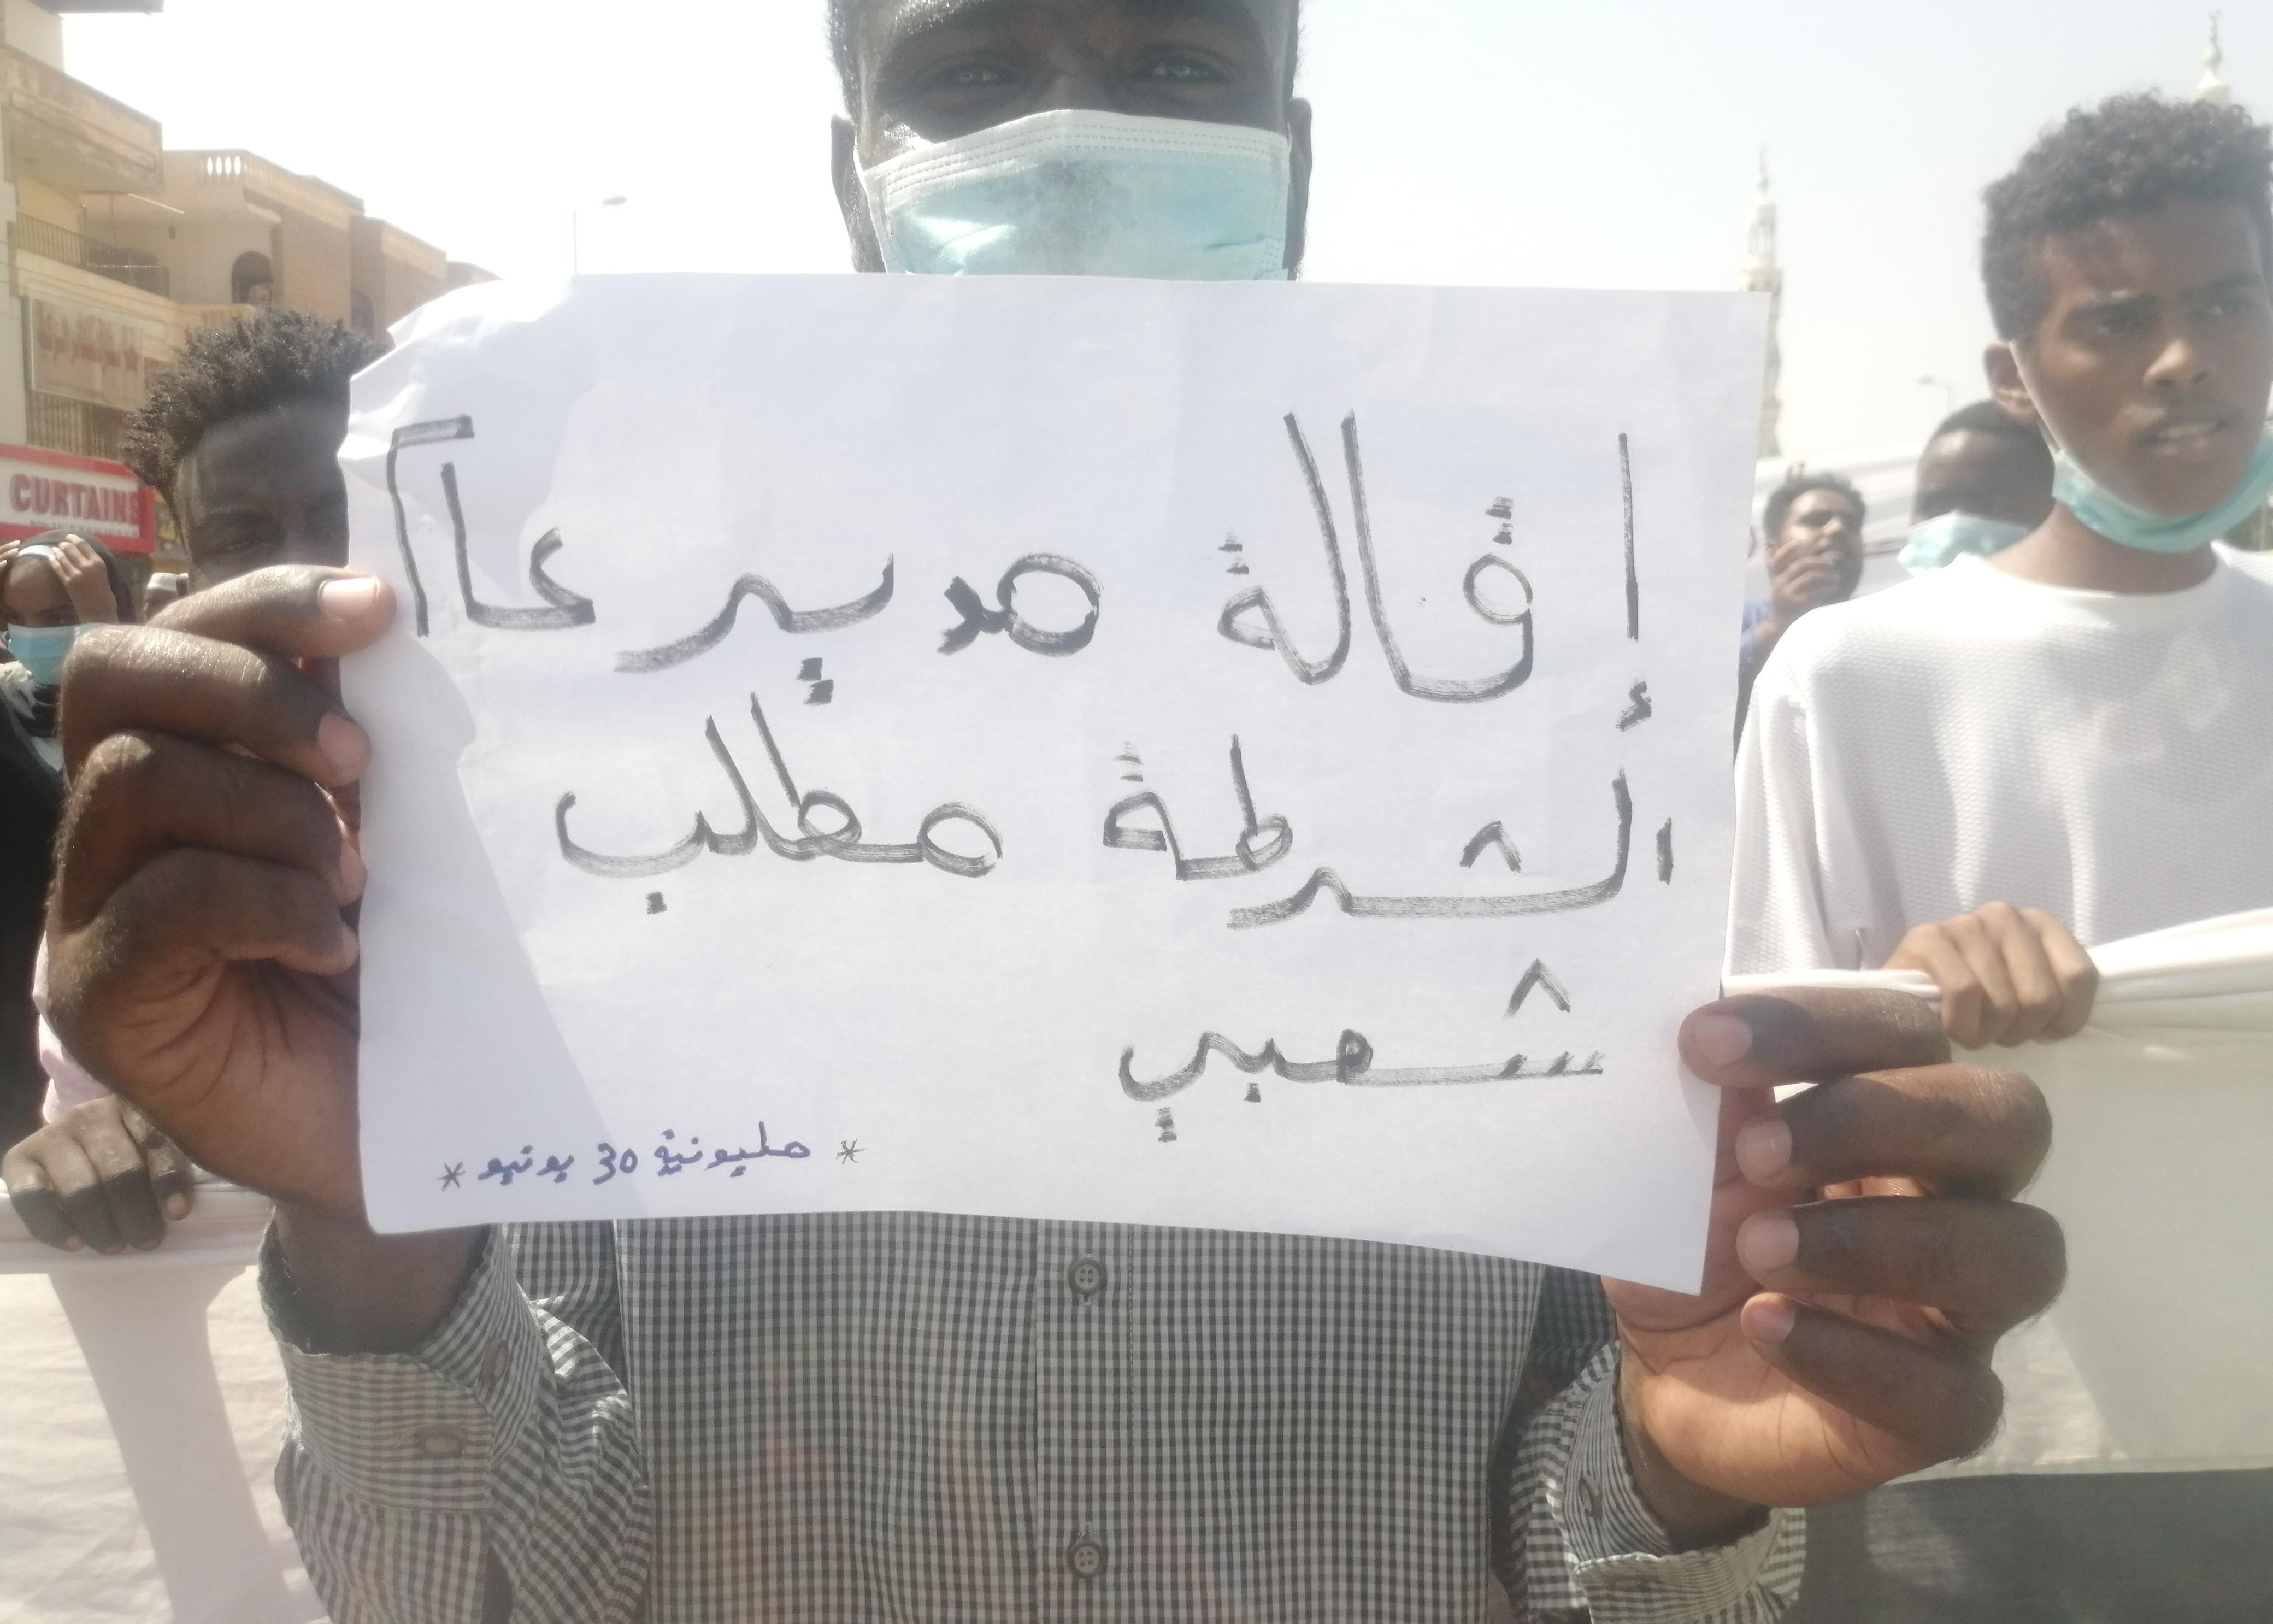 A man is holding up a sign during protests in Sudan.